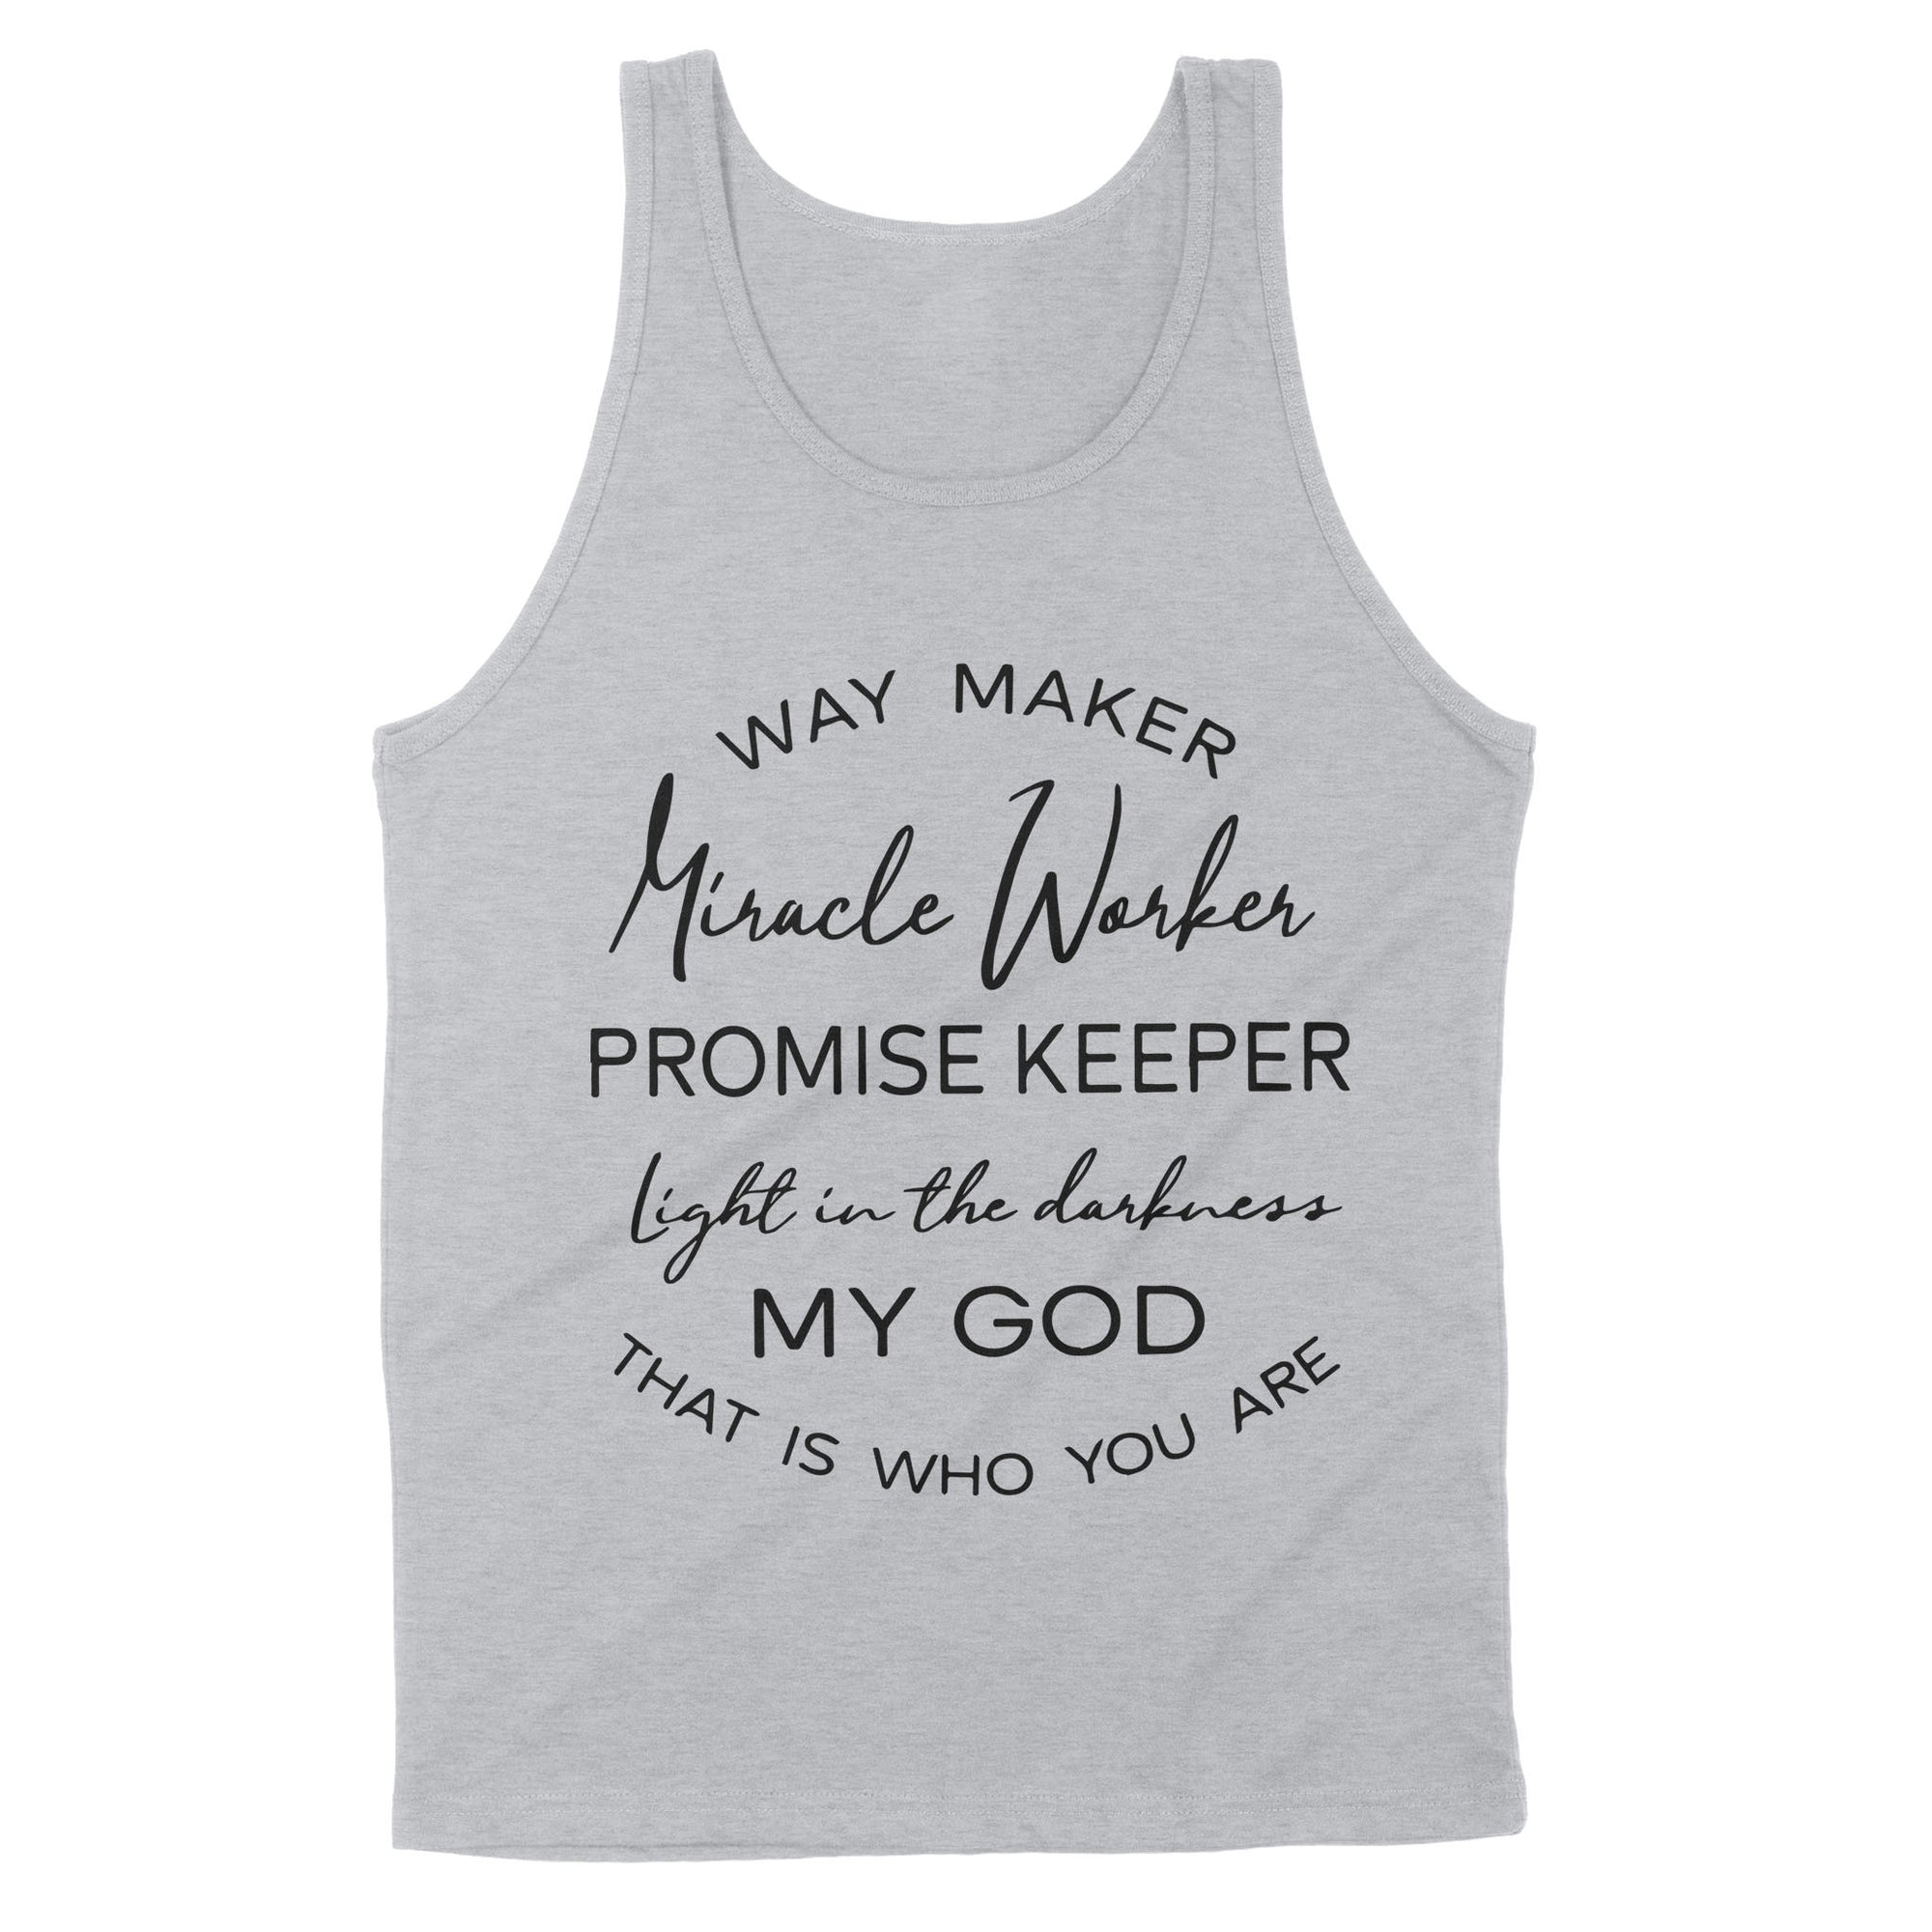 Way Maker Miracle Worker Promise Keeper Light In The Darkness My God That Is Who You Are - Premium Tank